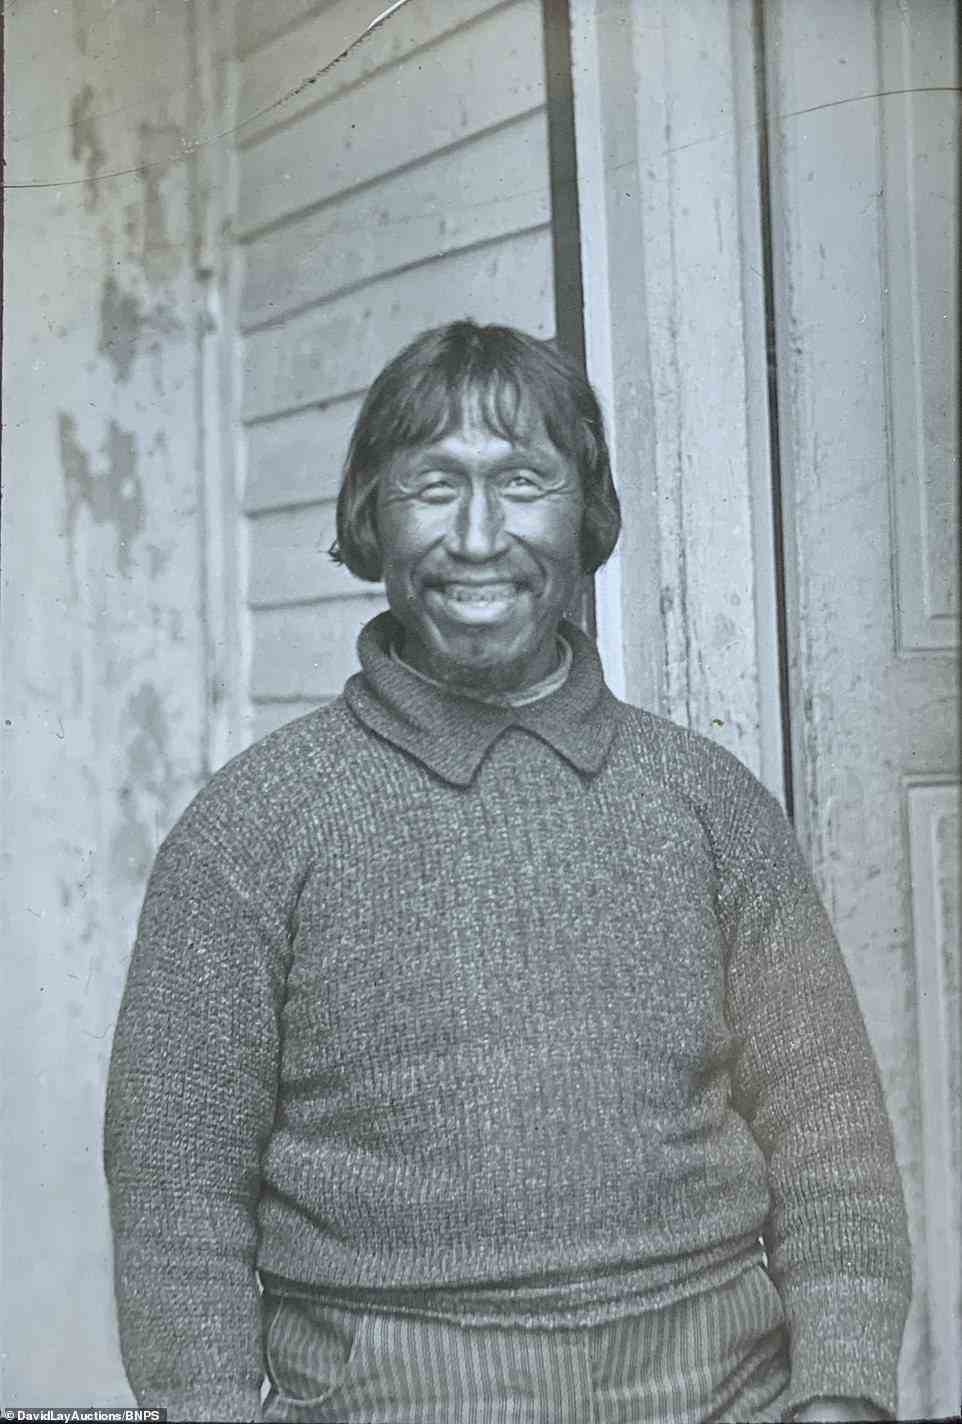 A smiling portrait of an Inuit man taken before communities were threatened by the Spanish Flu pandemic